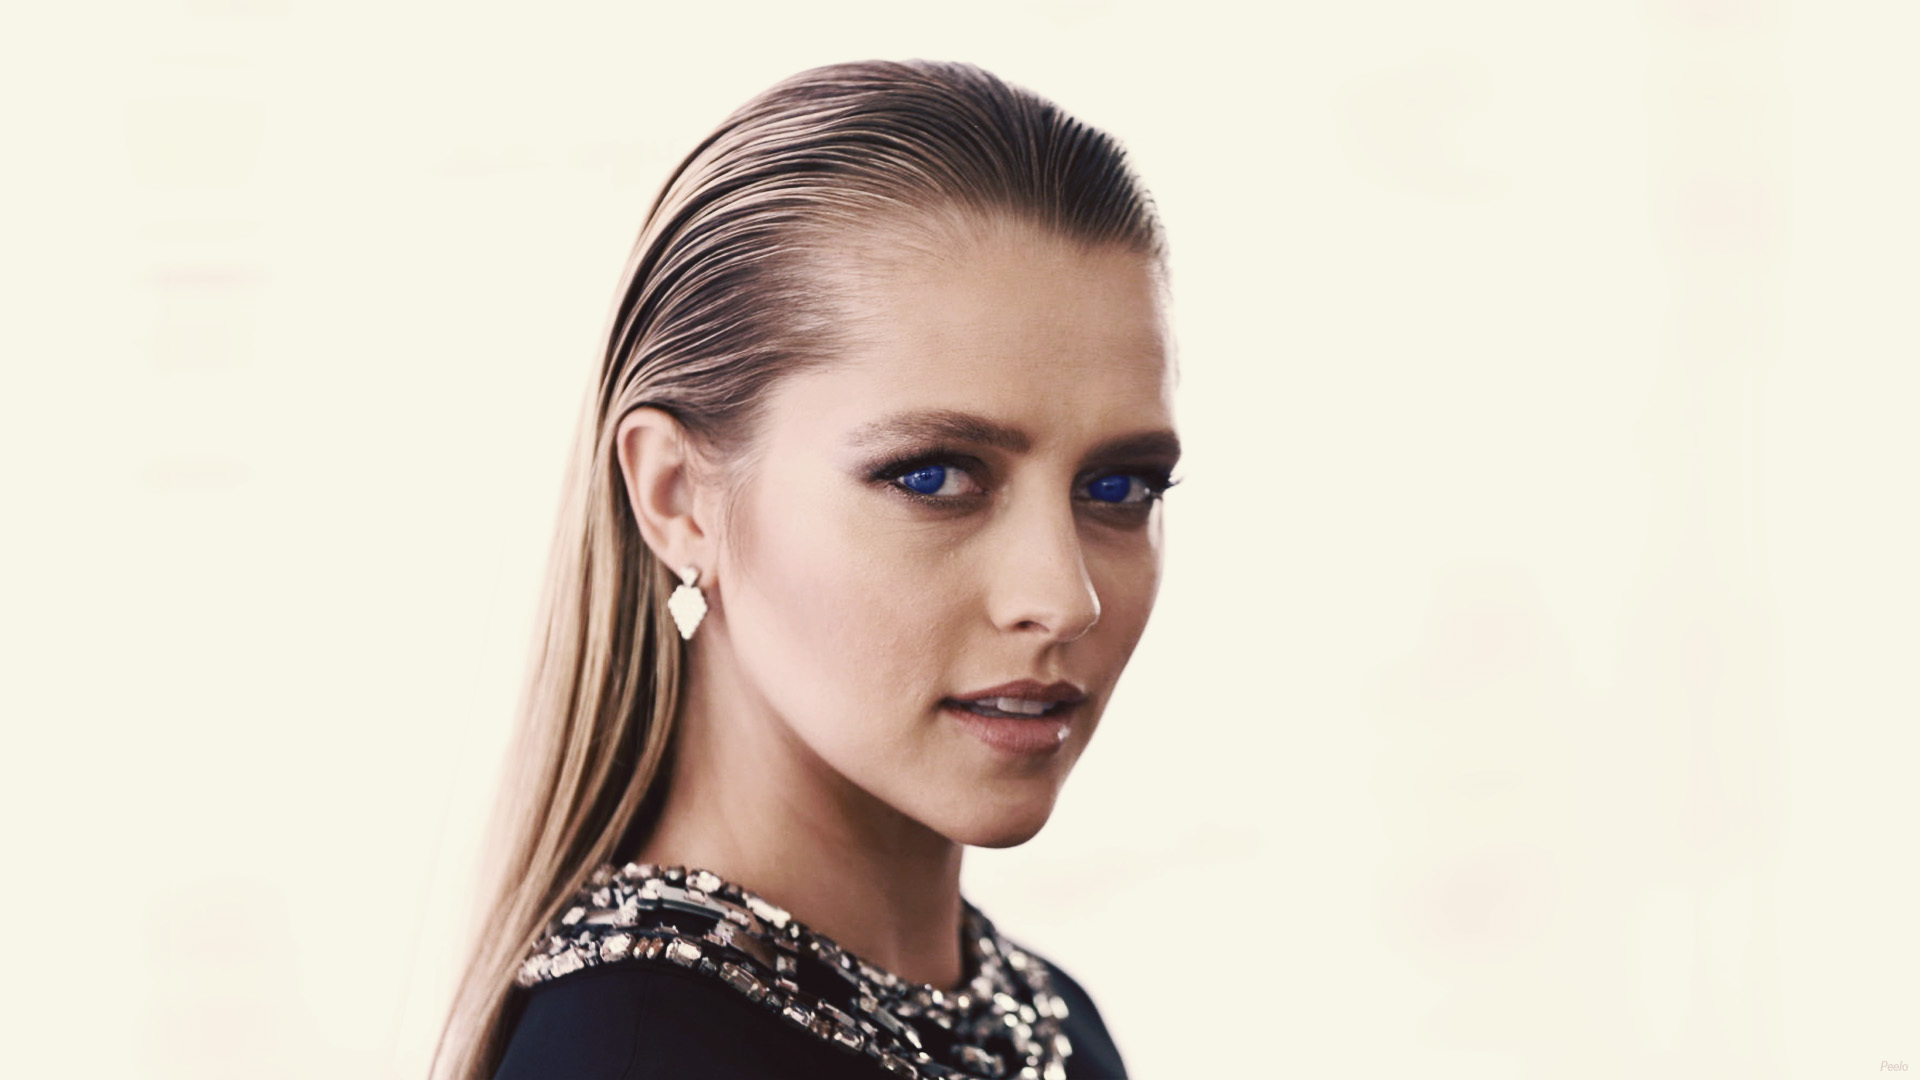 Teresa Palmer Wallpaper Image Photos Pictures Background